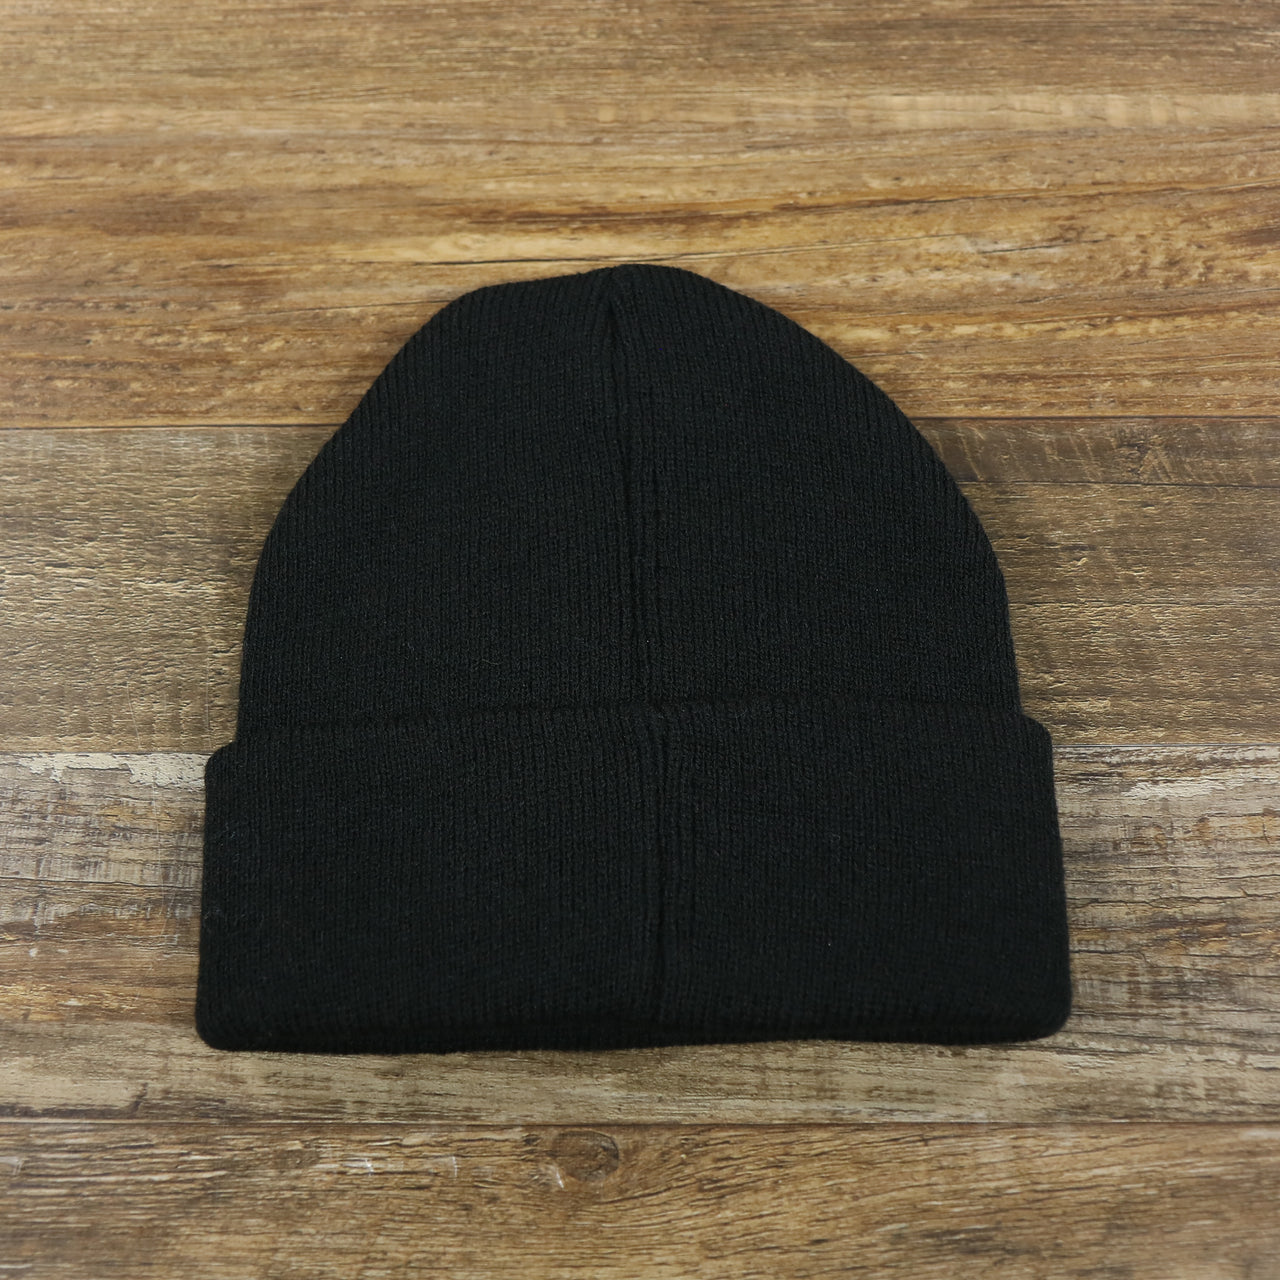 The backside of the Kid’s New Jersey Devils Basic Cuffed Winter Beanie | Black Winter Beanie